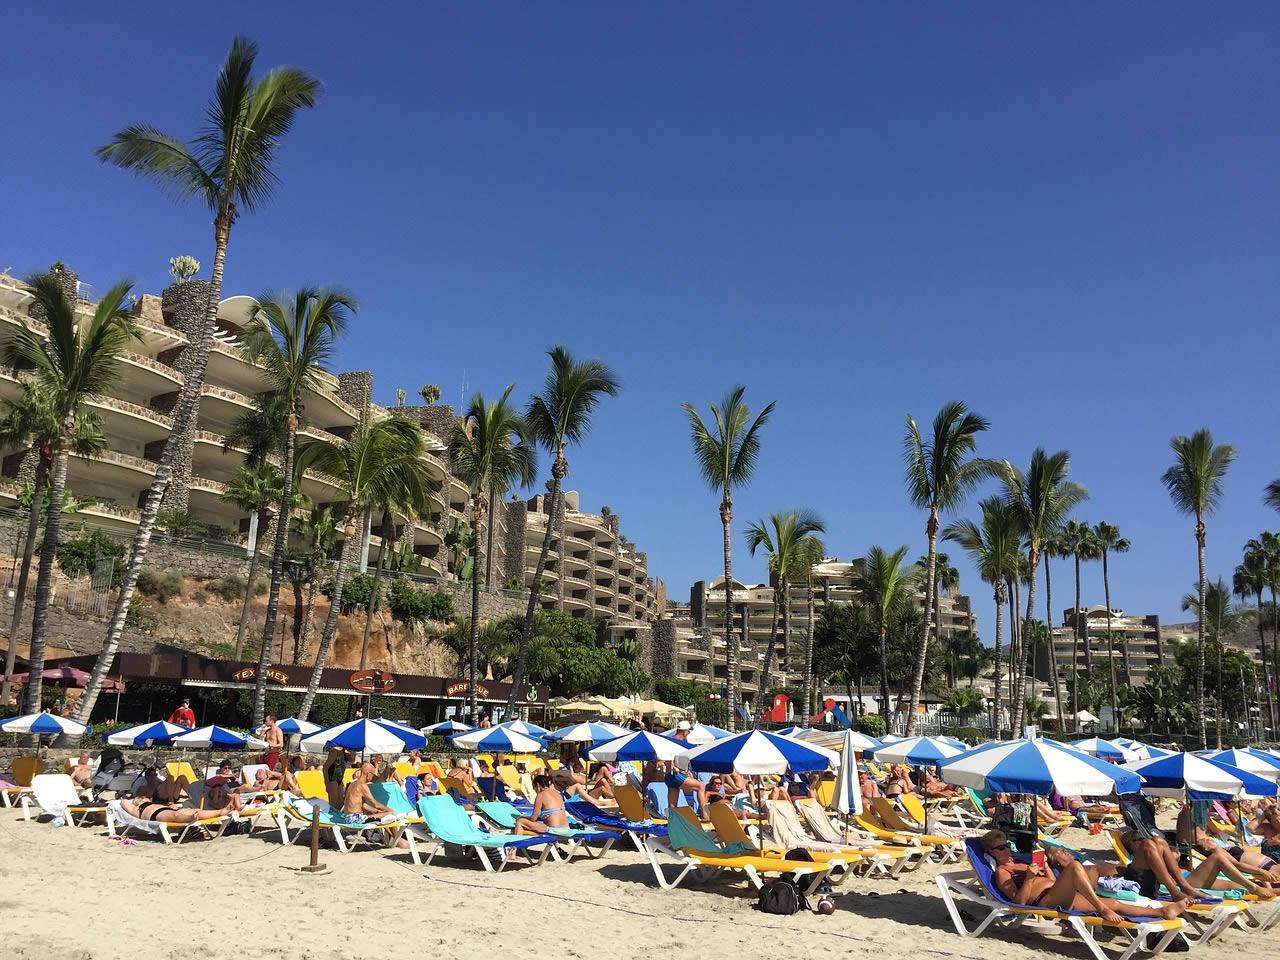 Timeshare Claims biggest week ever recorded - Seventy Six positive awards valued at $3,600,587.